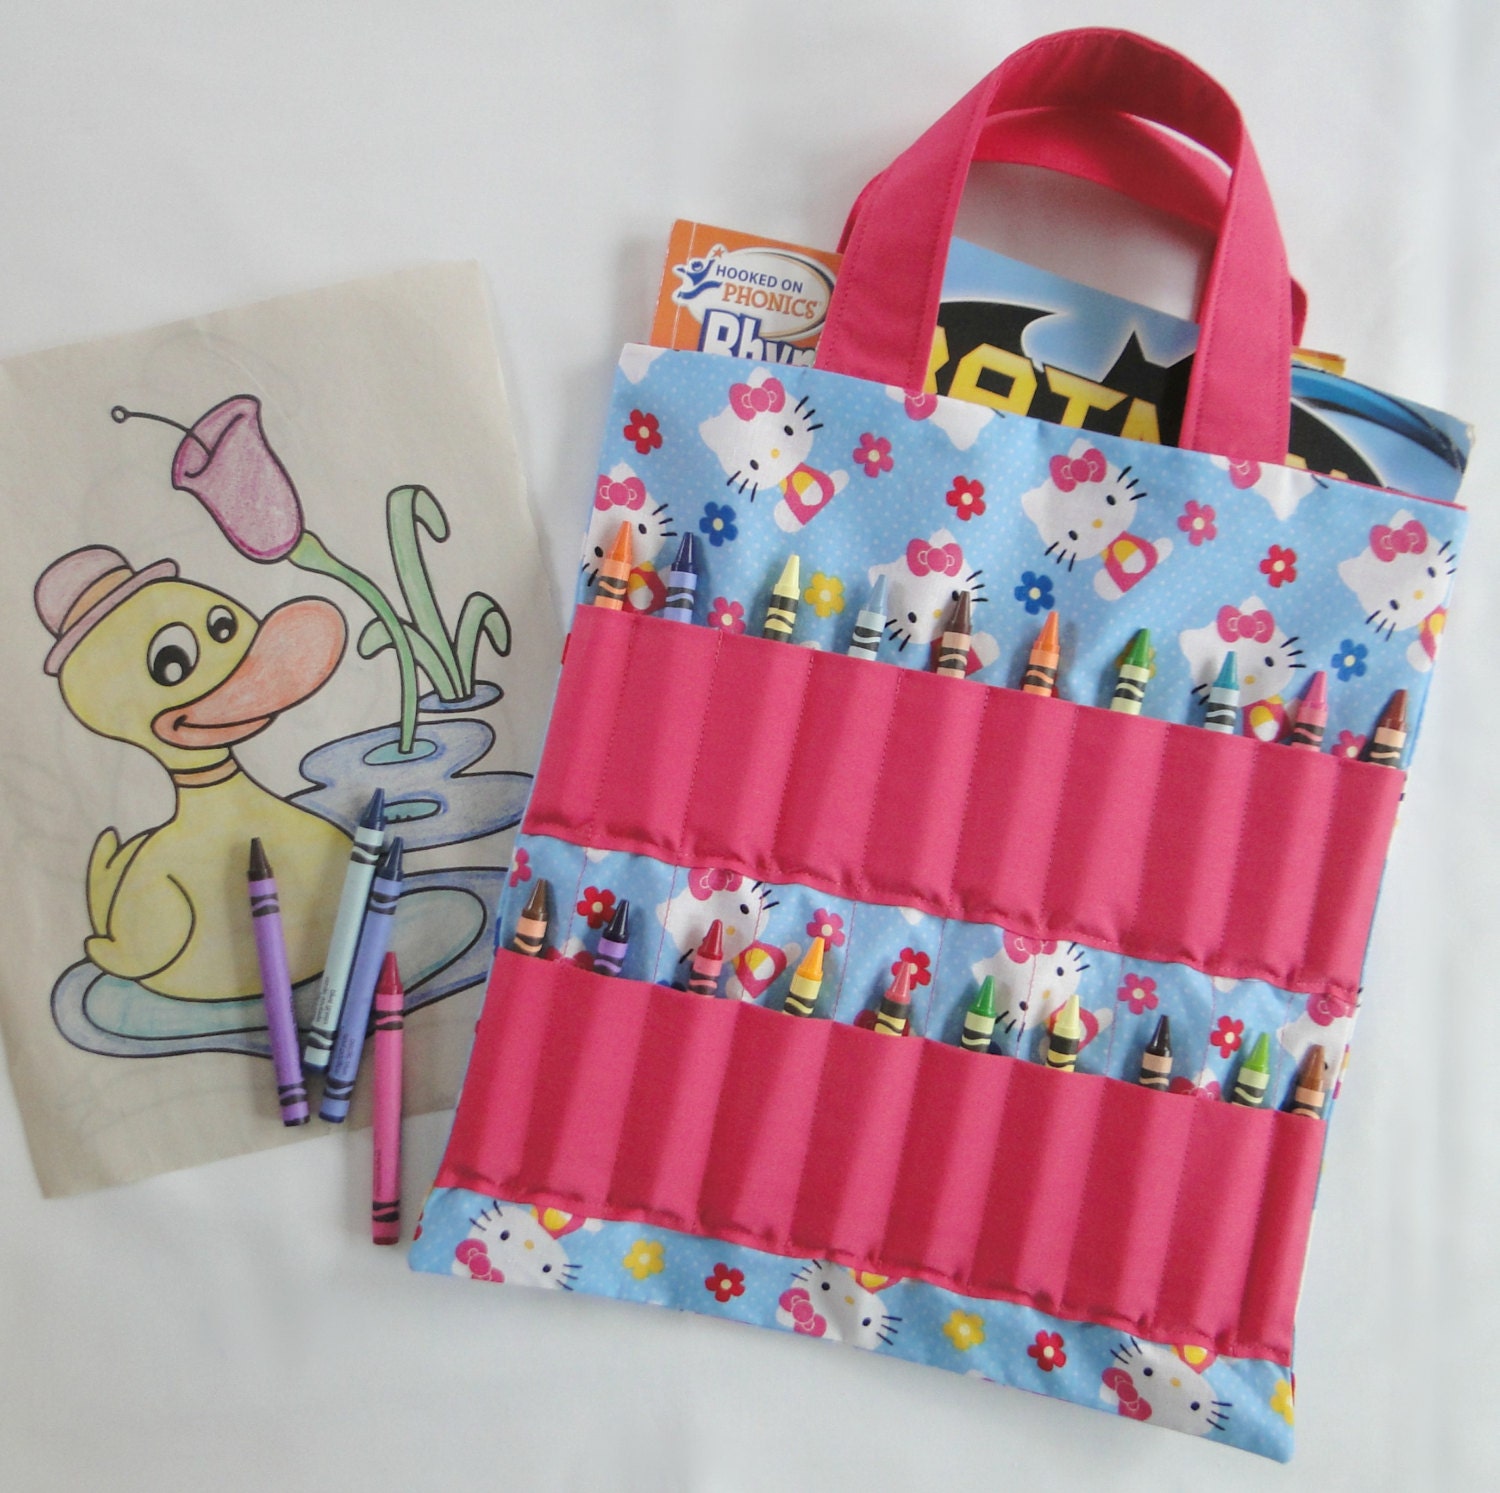 Download Hello Kitty Coloring Book and Crayon Holder by Shoppebylola